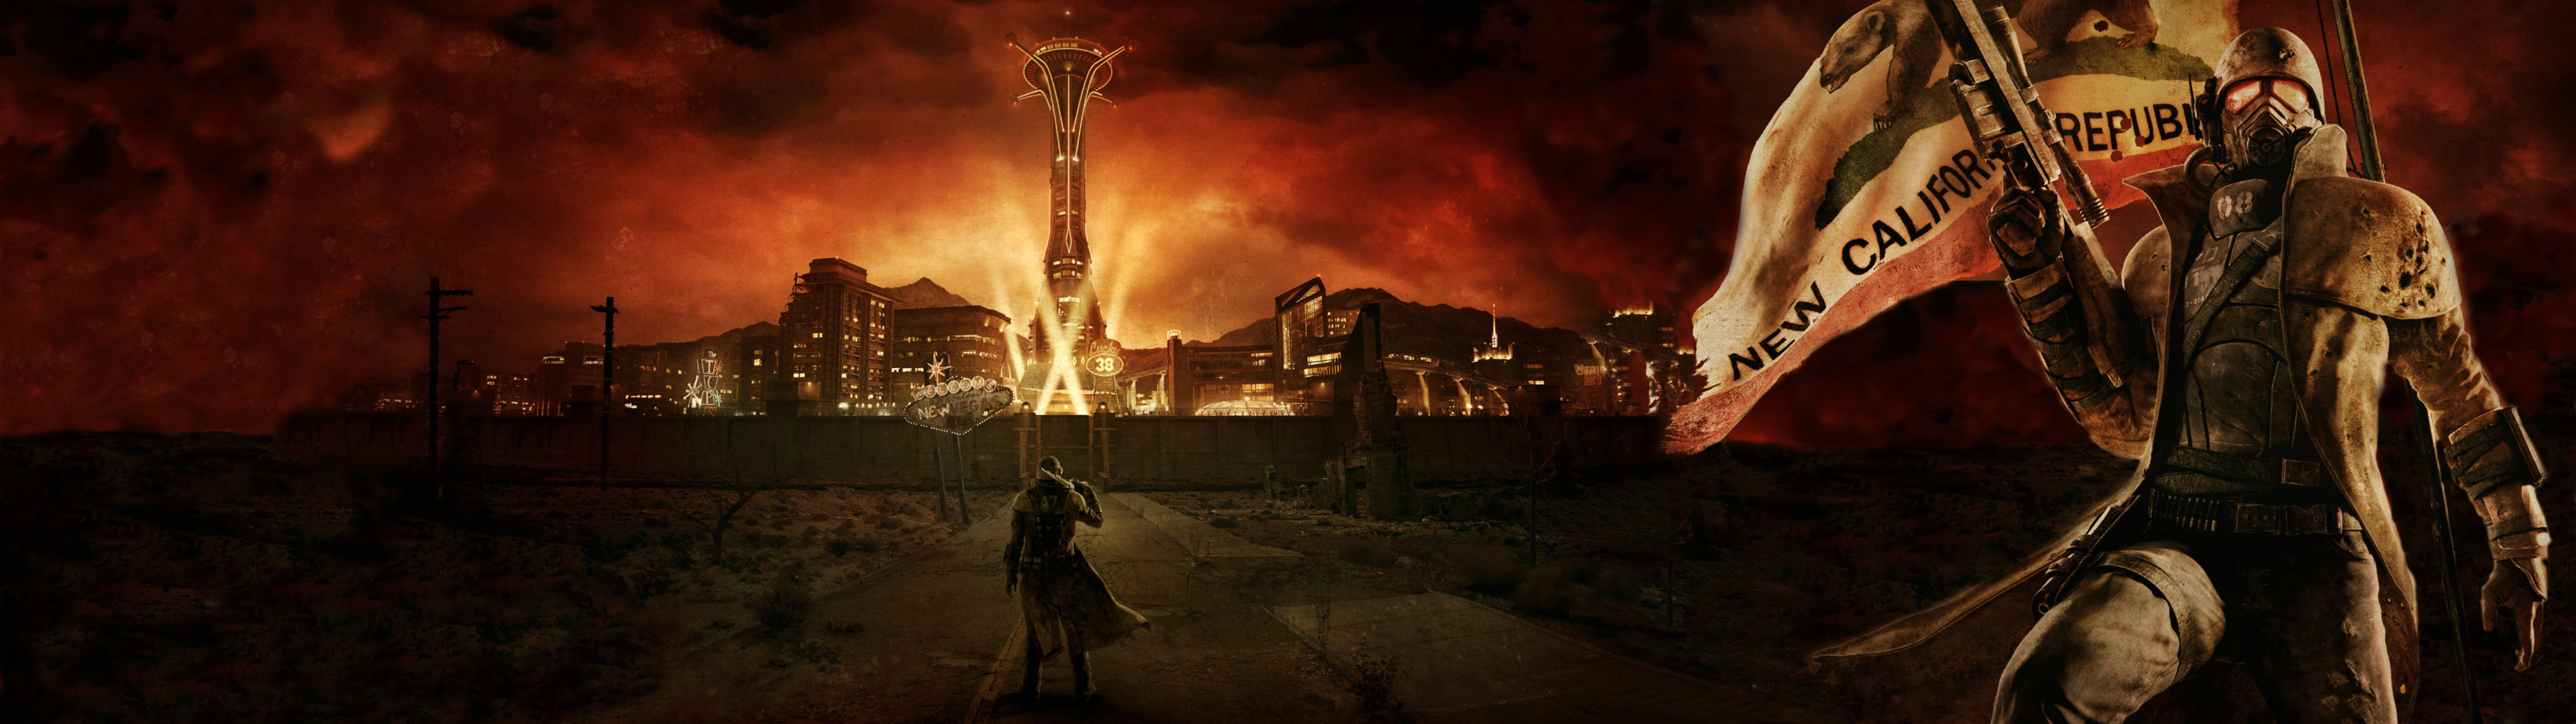 I Made A Fallout New Vegas Dual Monitor Wallpaper R Fnv